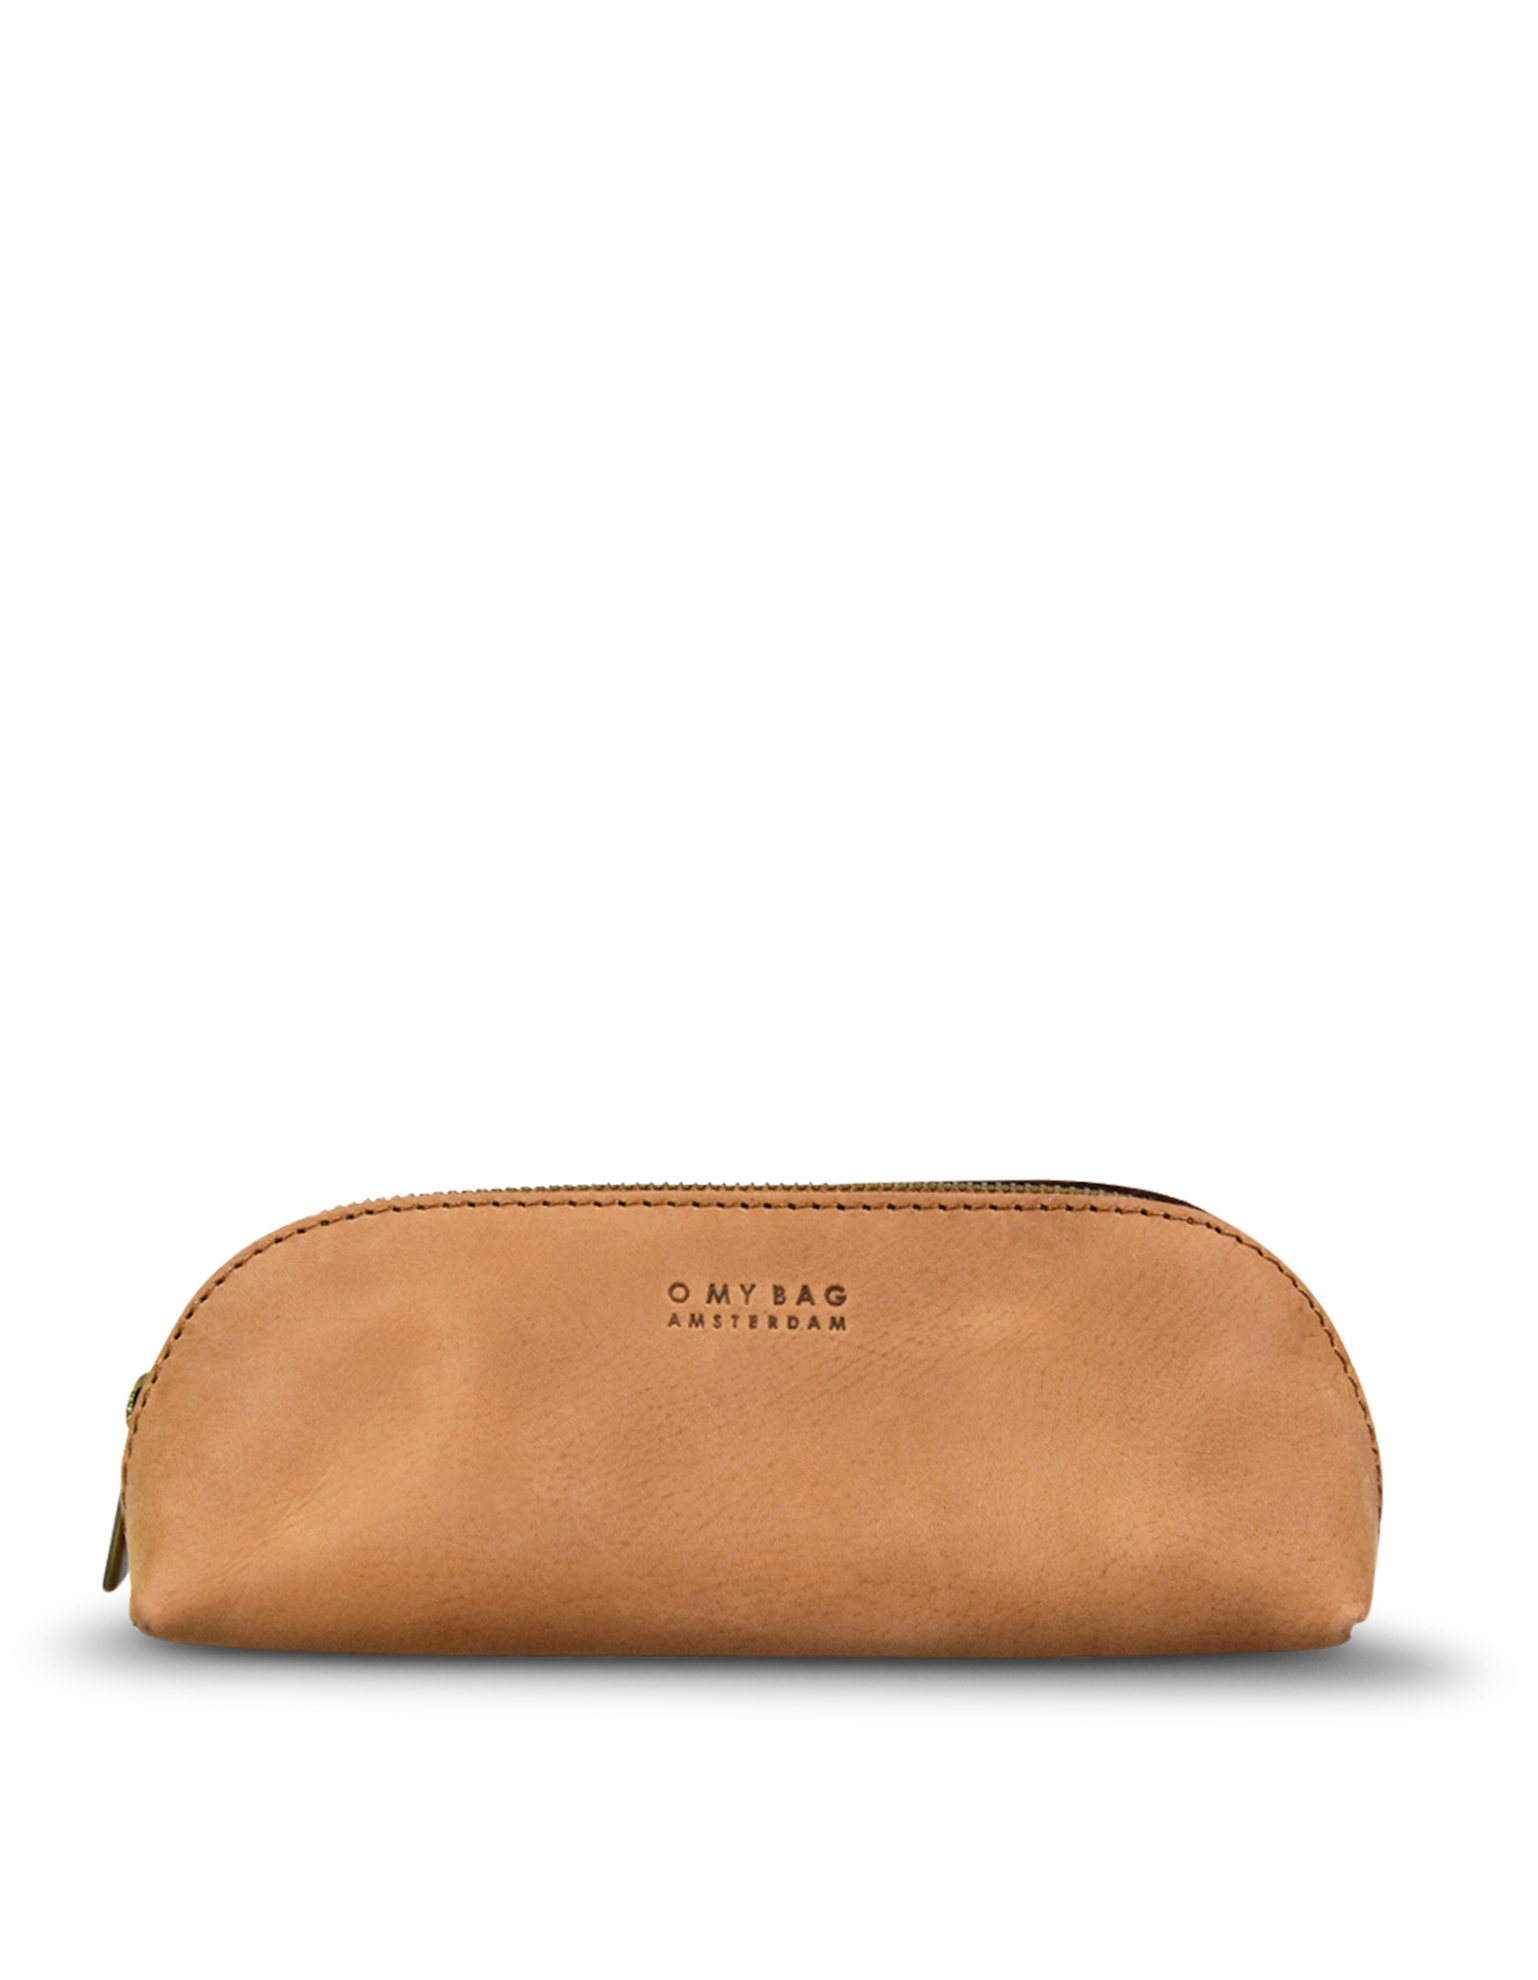 Large Pencil Case Camel Hunter Leather. Zipper Leather pencil case. Front product image.